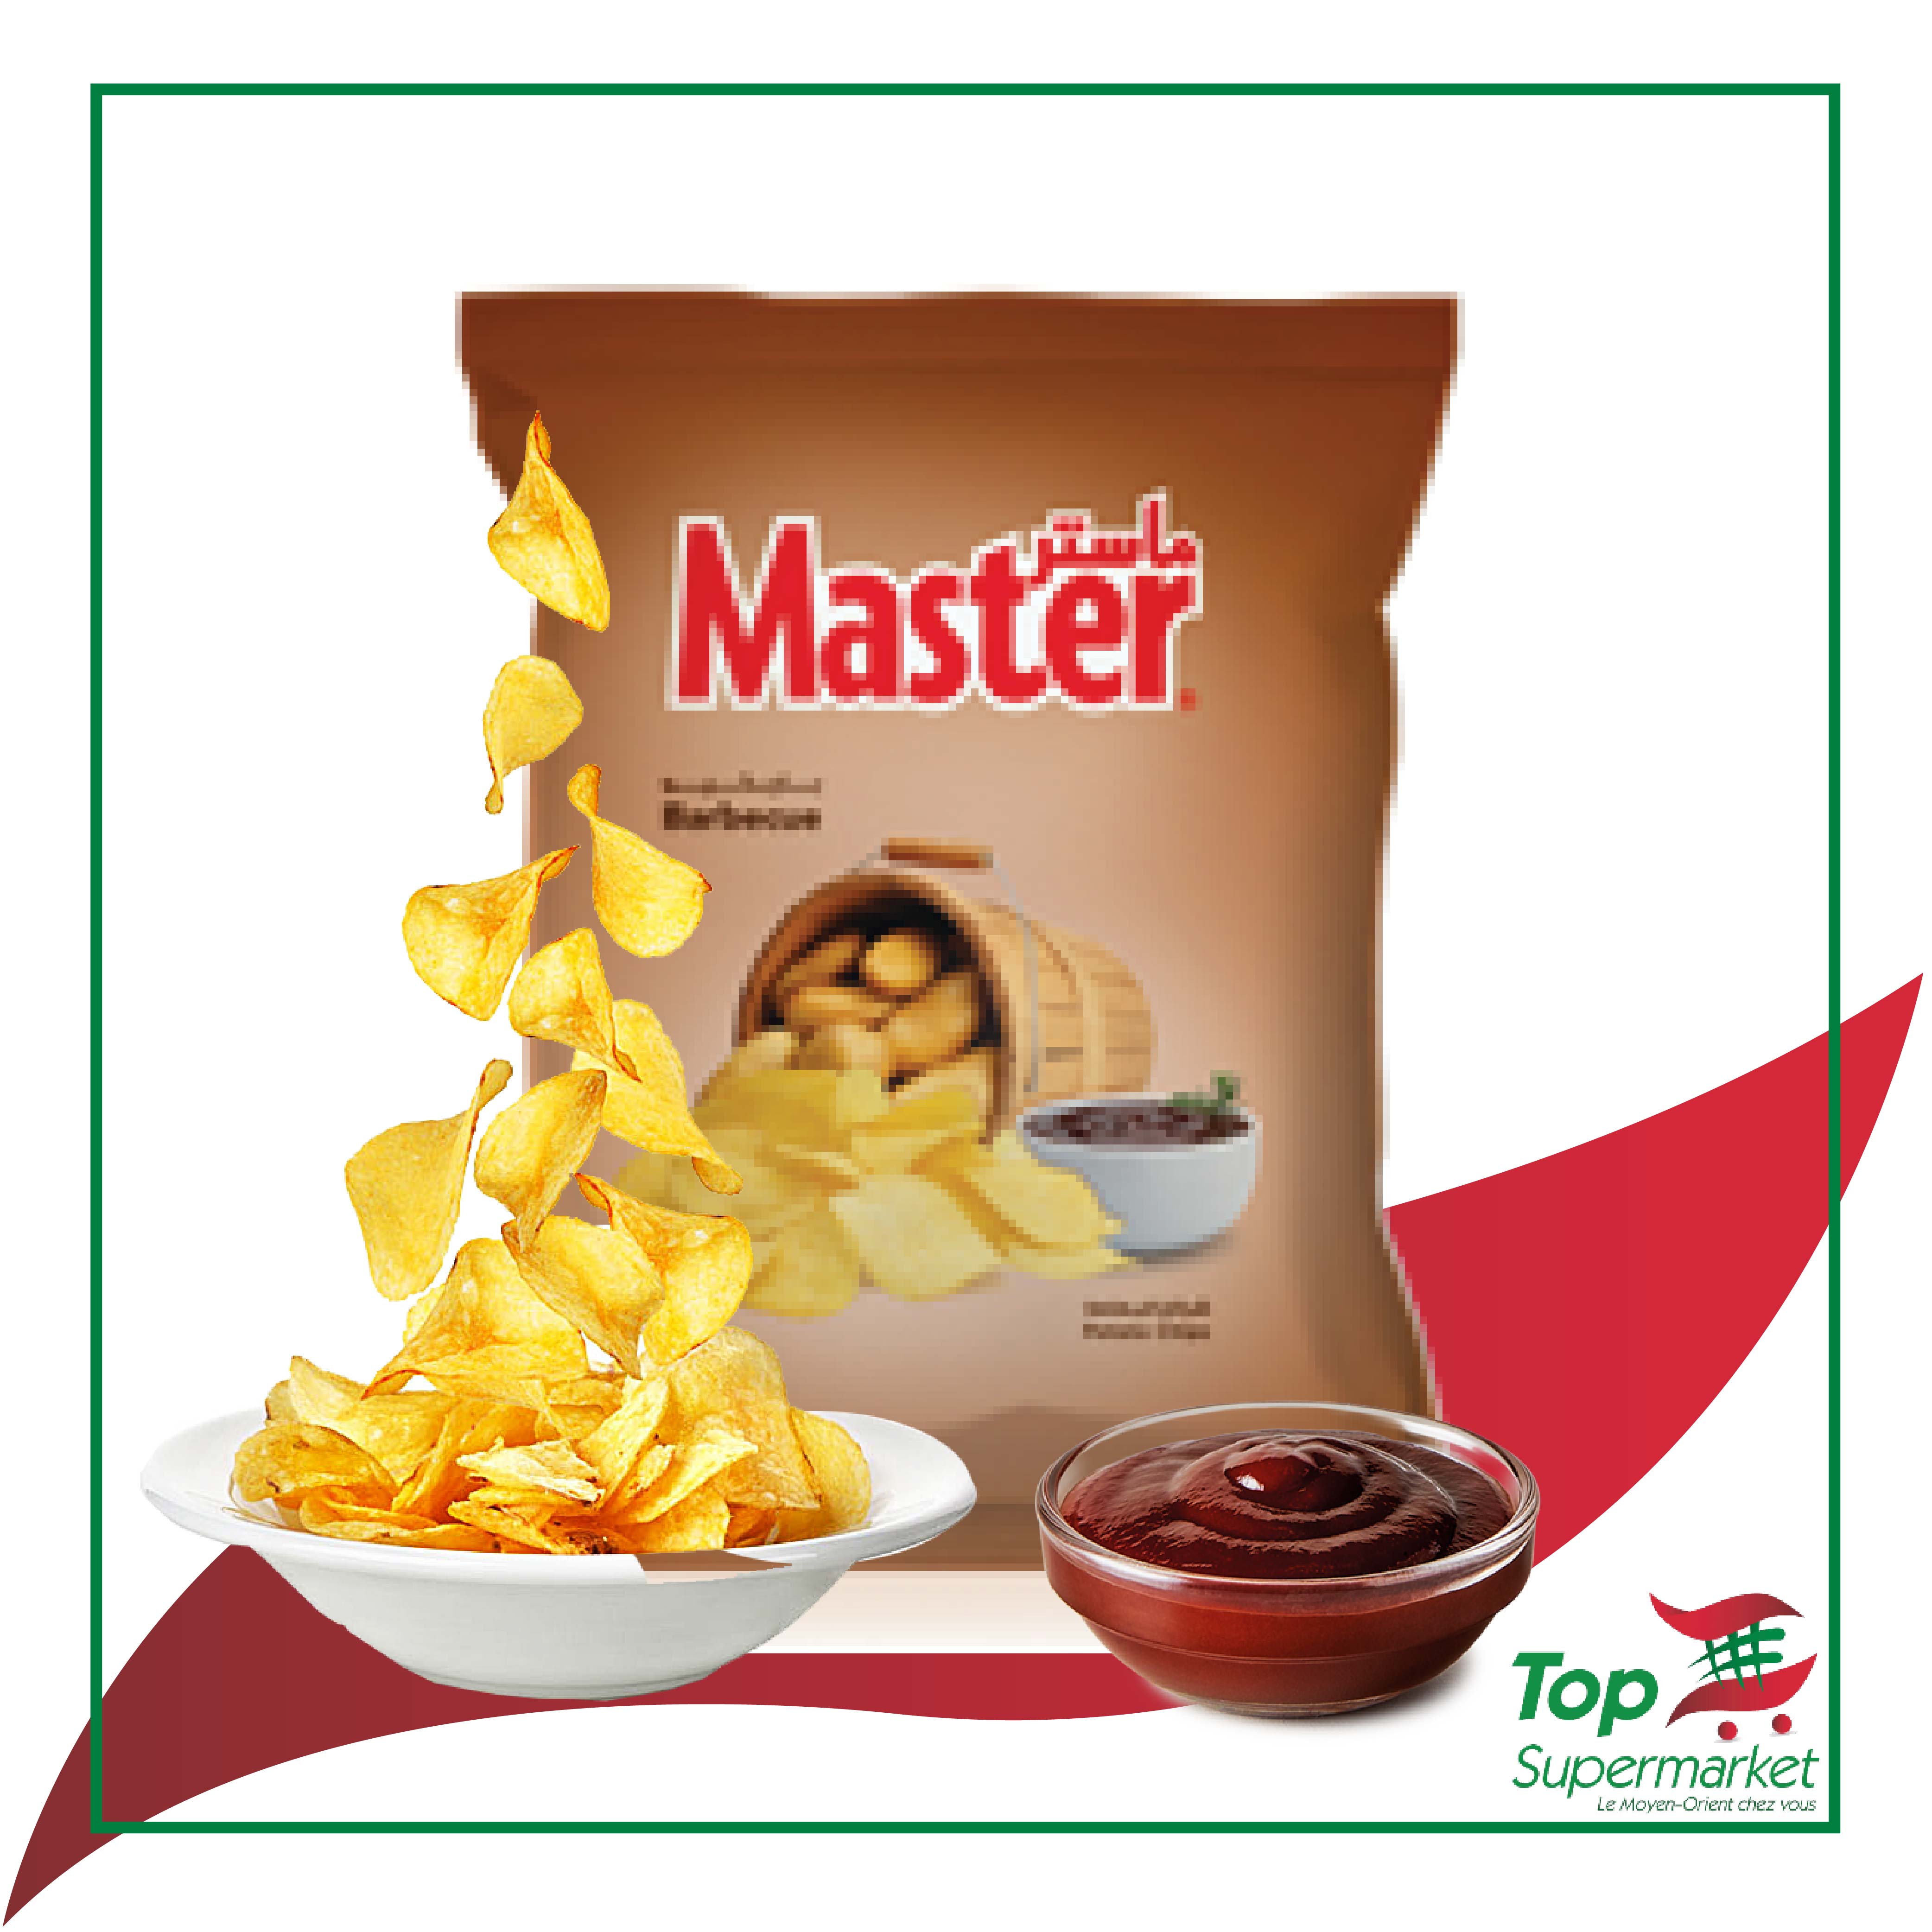 Master Chips Barbecue 106gr